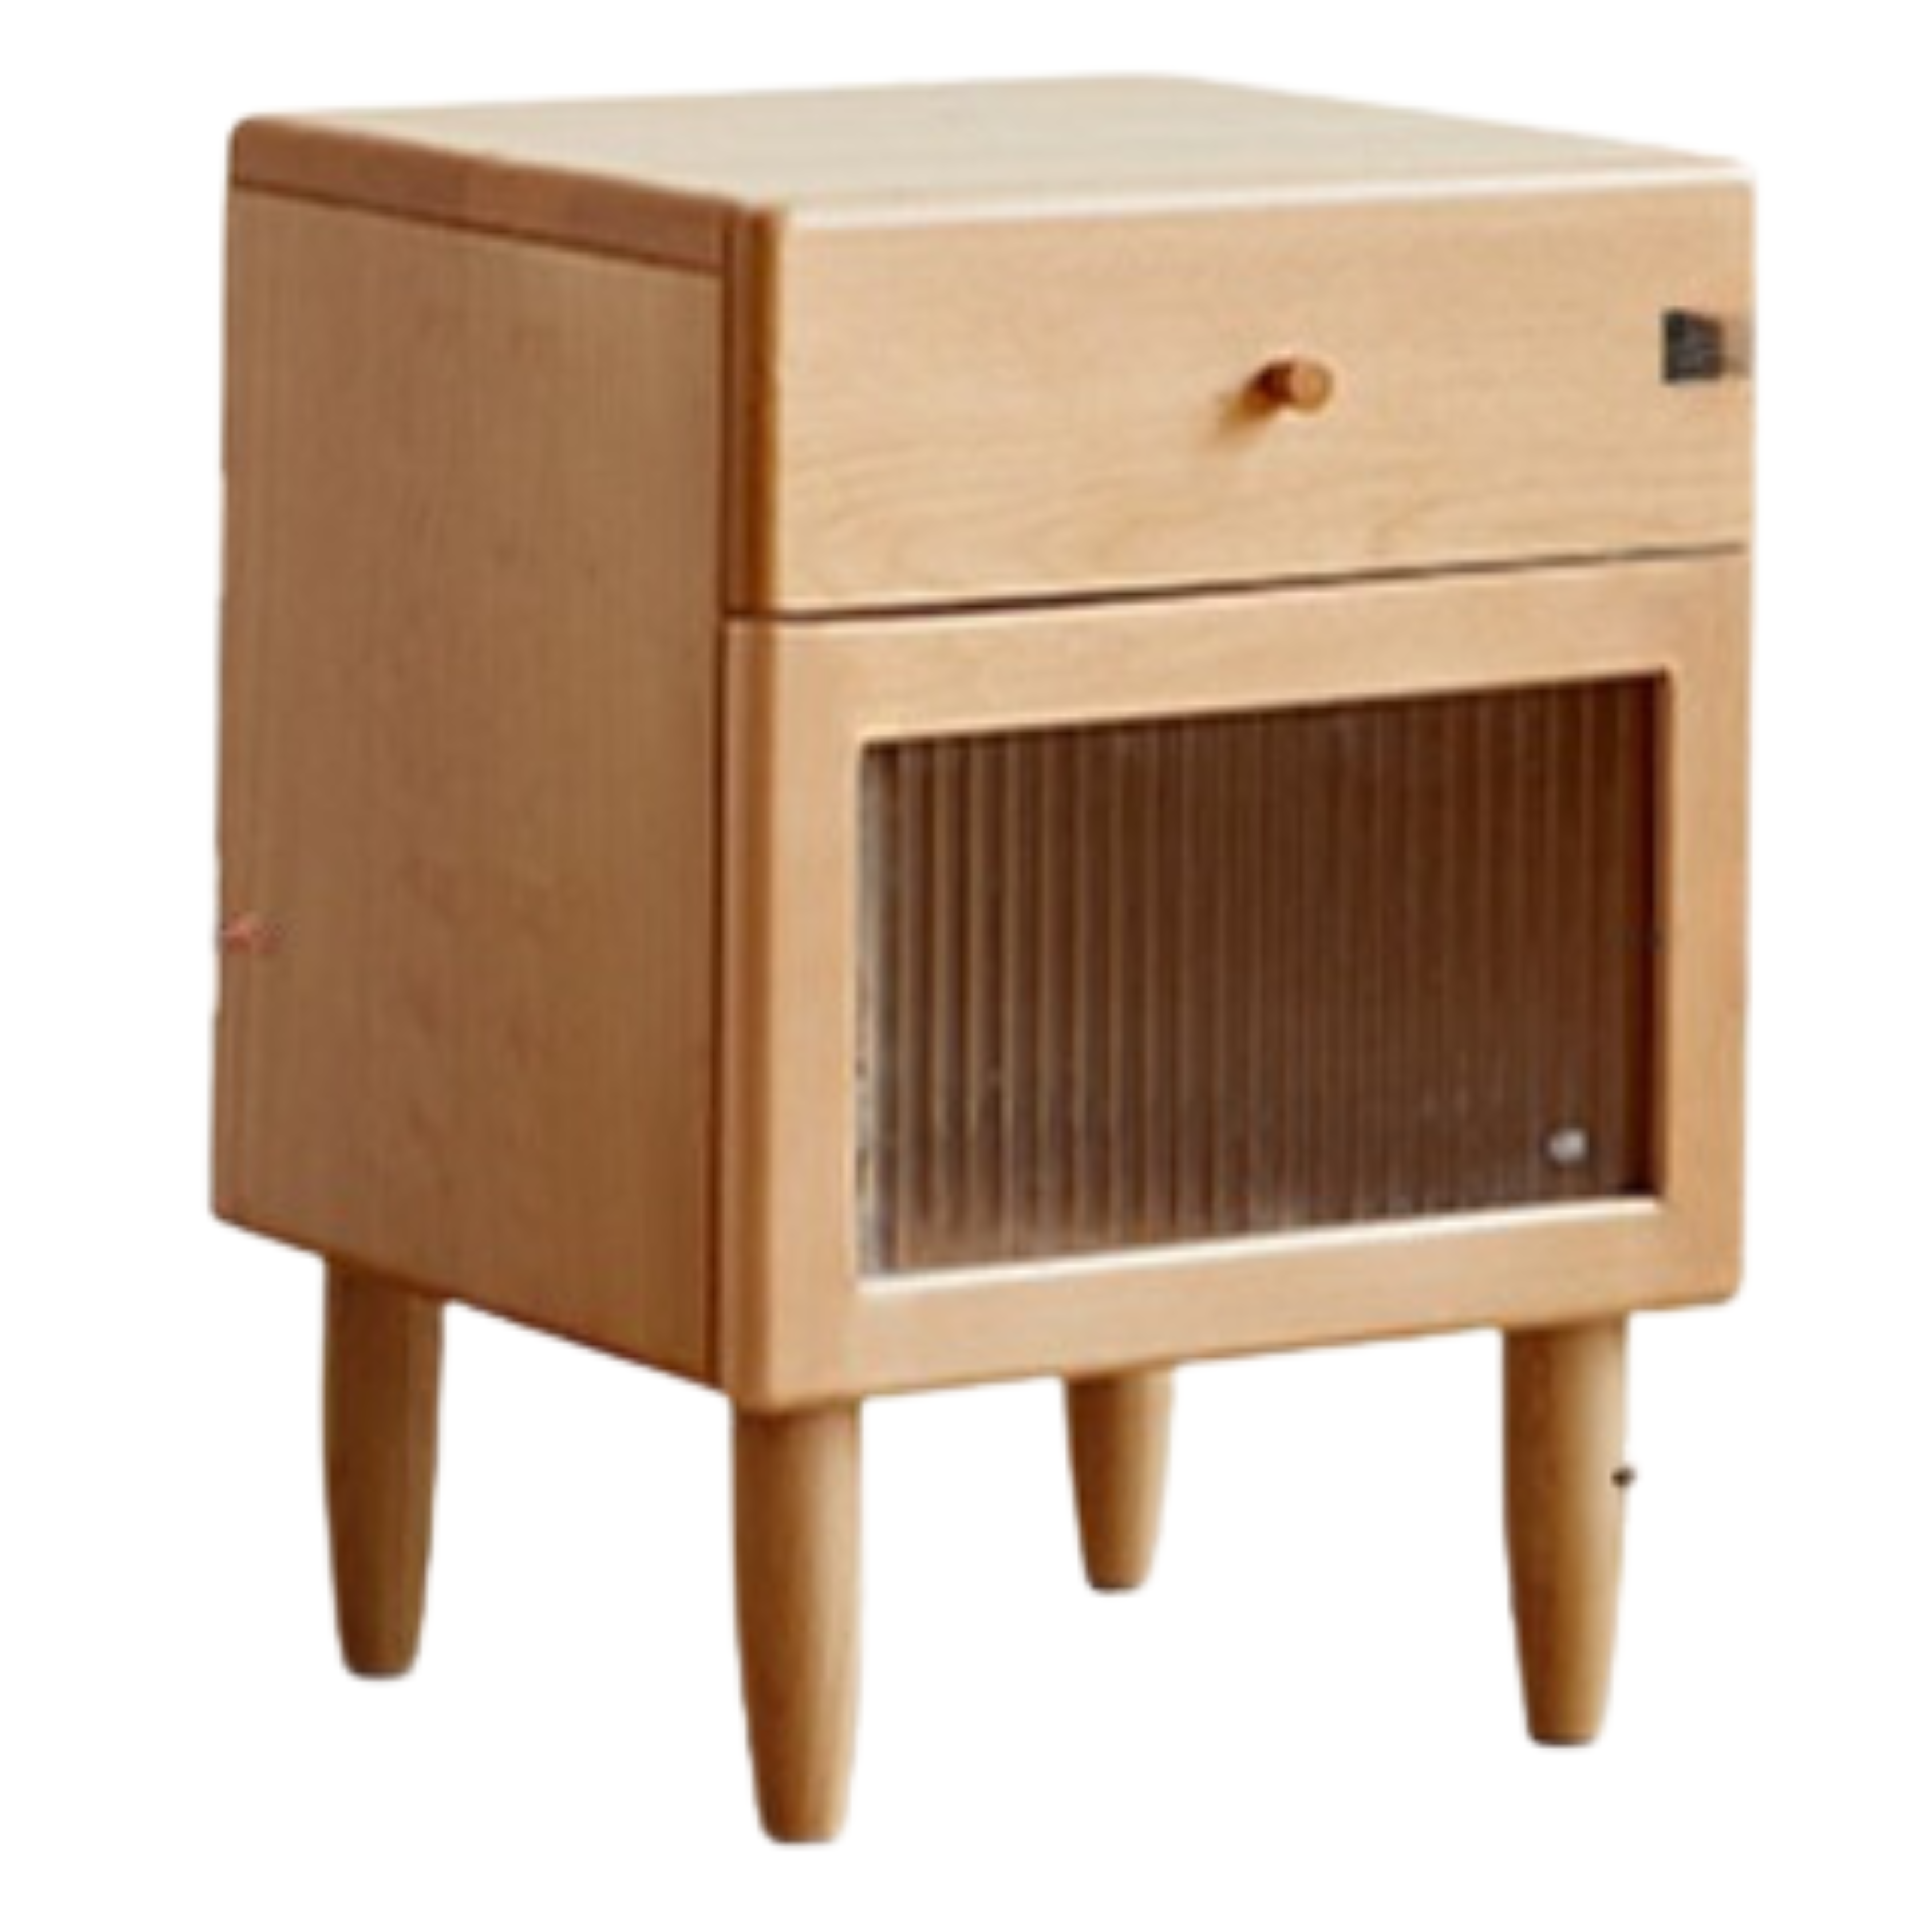 Beech solid wood night stand with light)